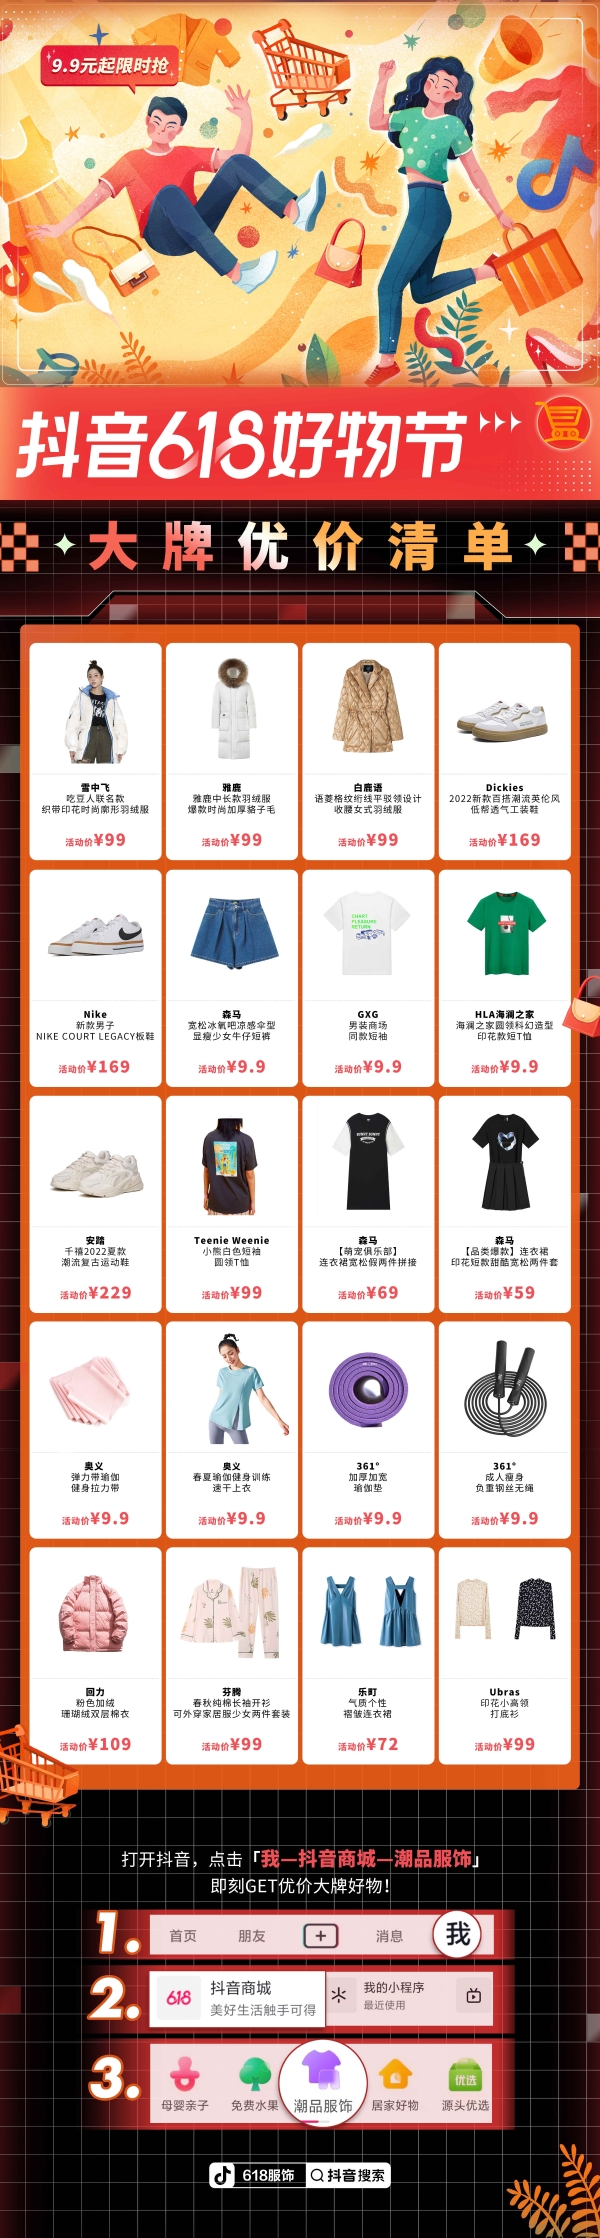   Trendy clothing and top goods are worth buying, Douyin e-commerce 618 promotion launches clothing exclusive benefits 